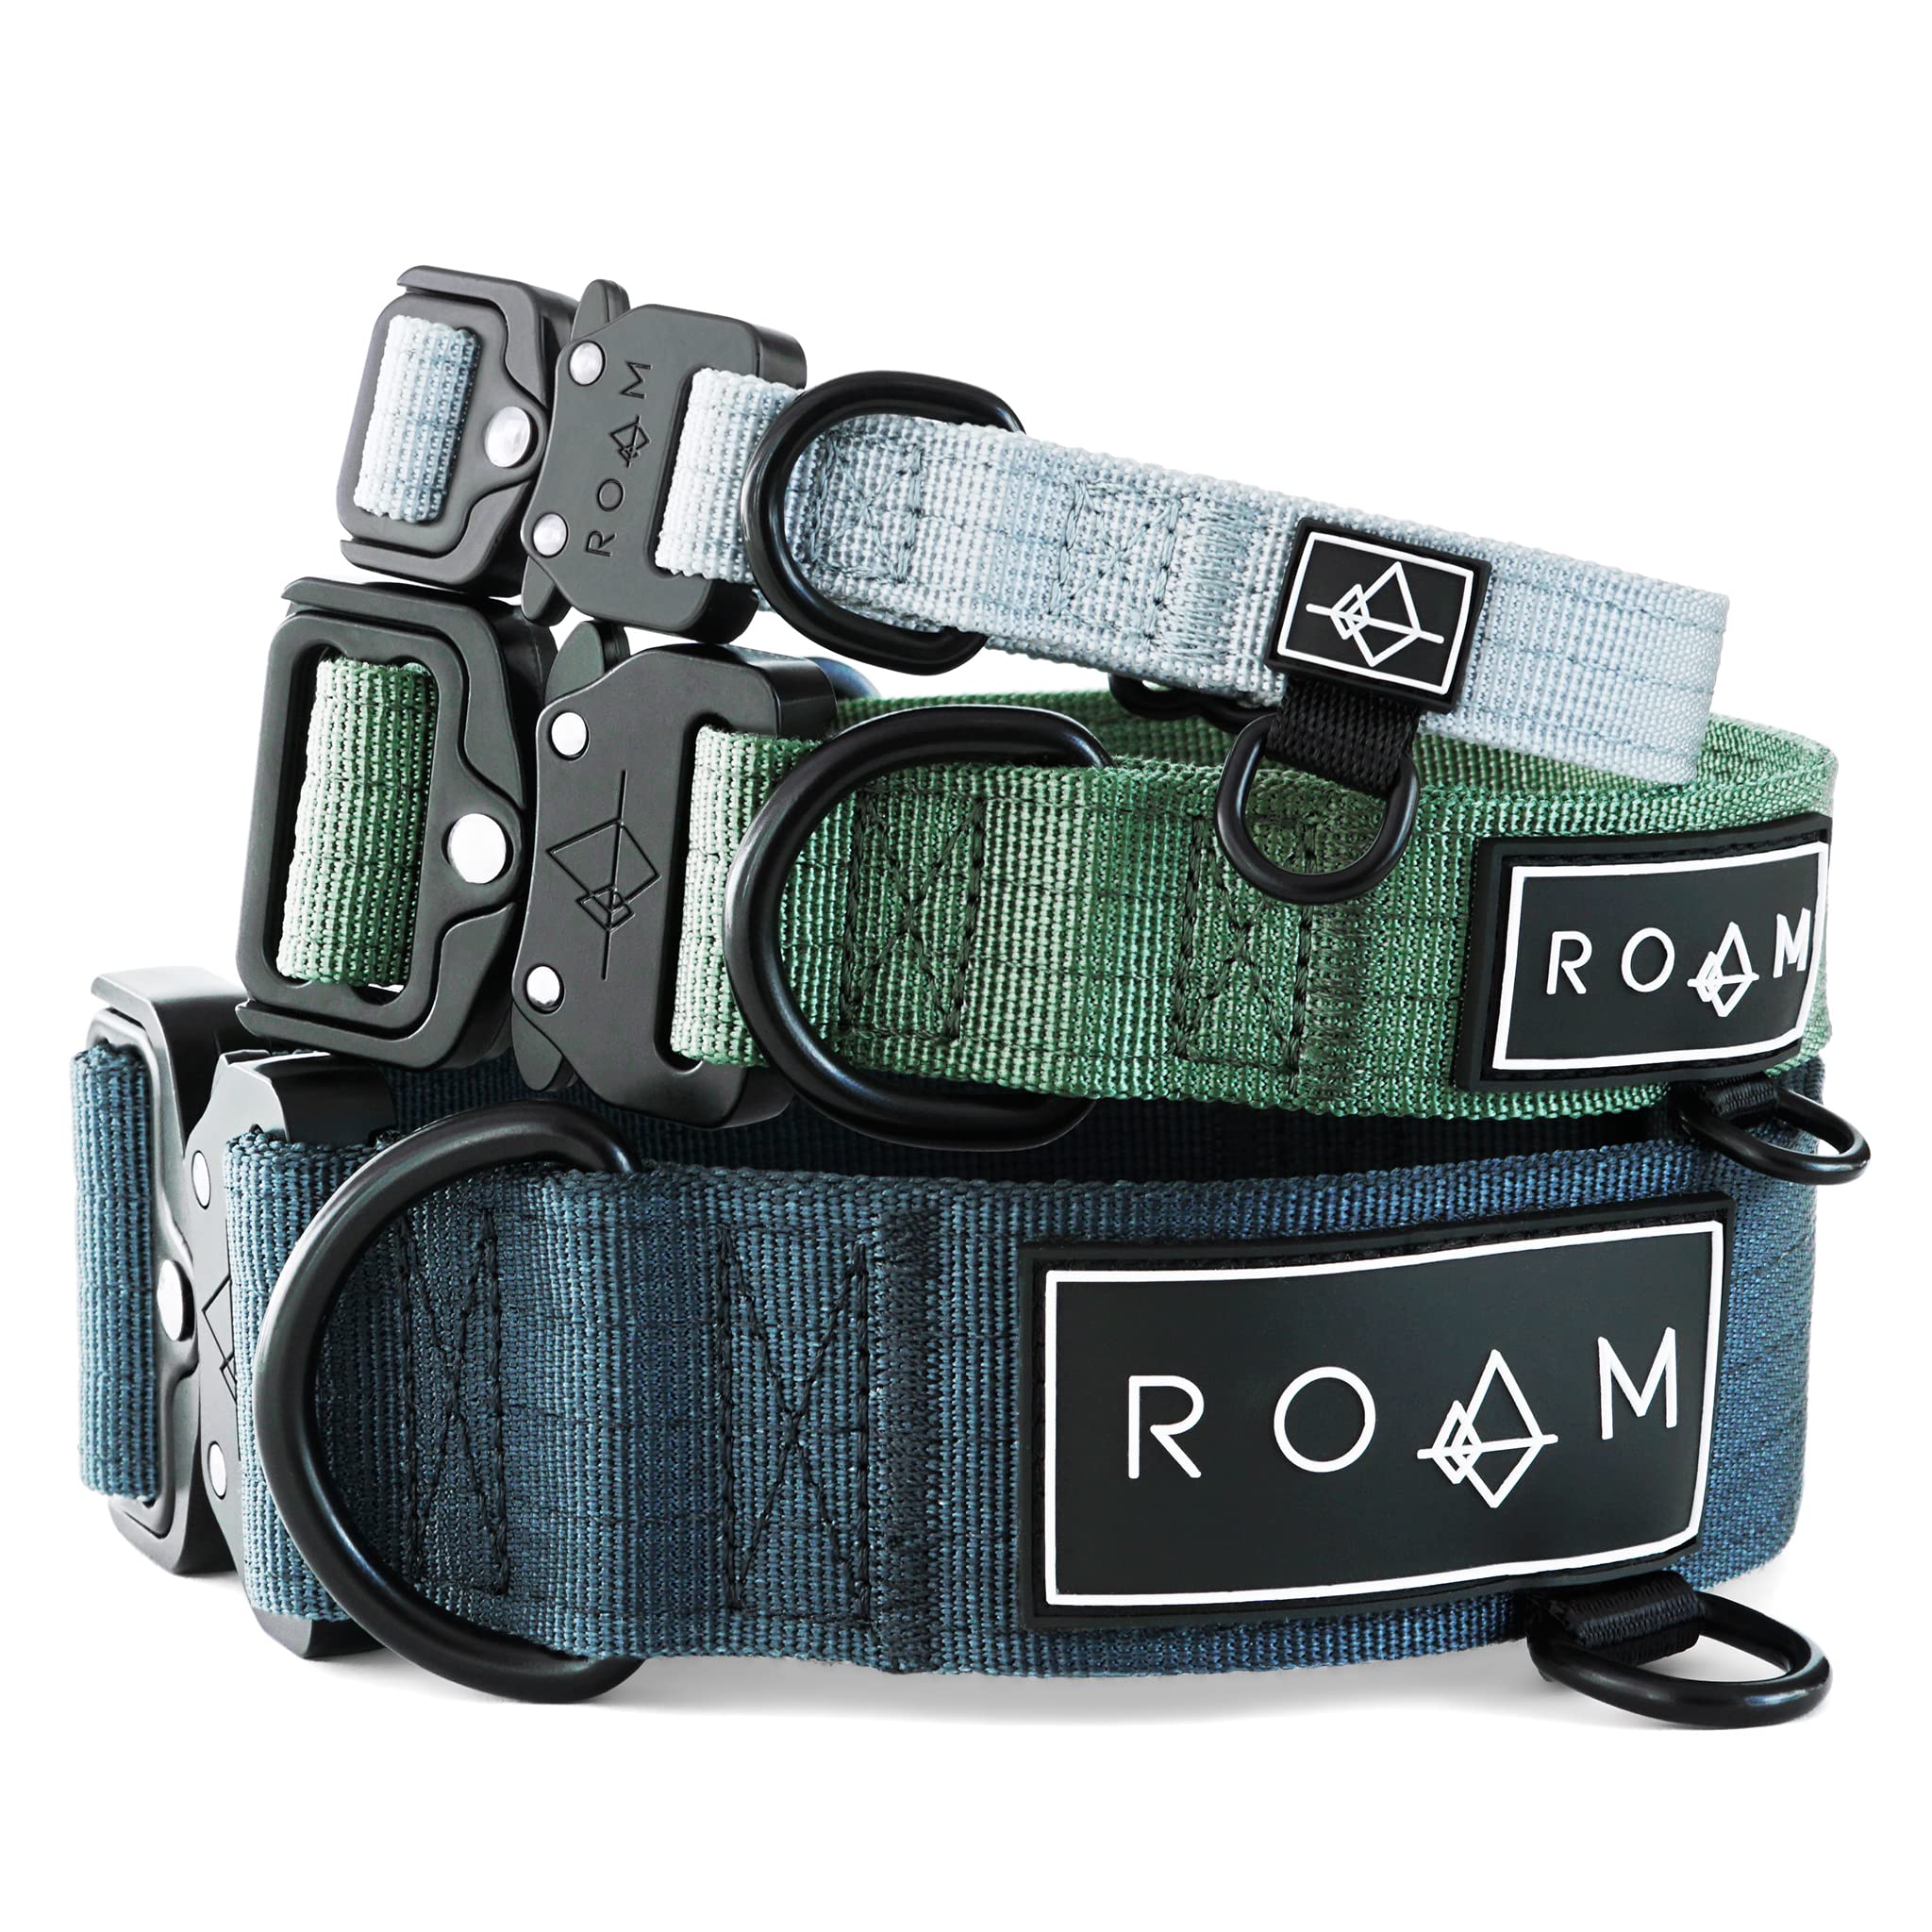 Roam Made To Roam Premium Dog Collar - Adjustable Heavy Duty Nylon Collar With Quick-Release Metal Buckle (Vermont Weekends, Size 3)